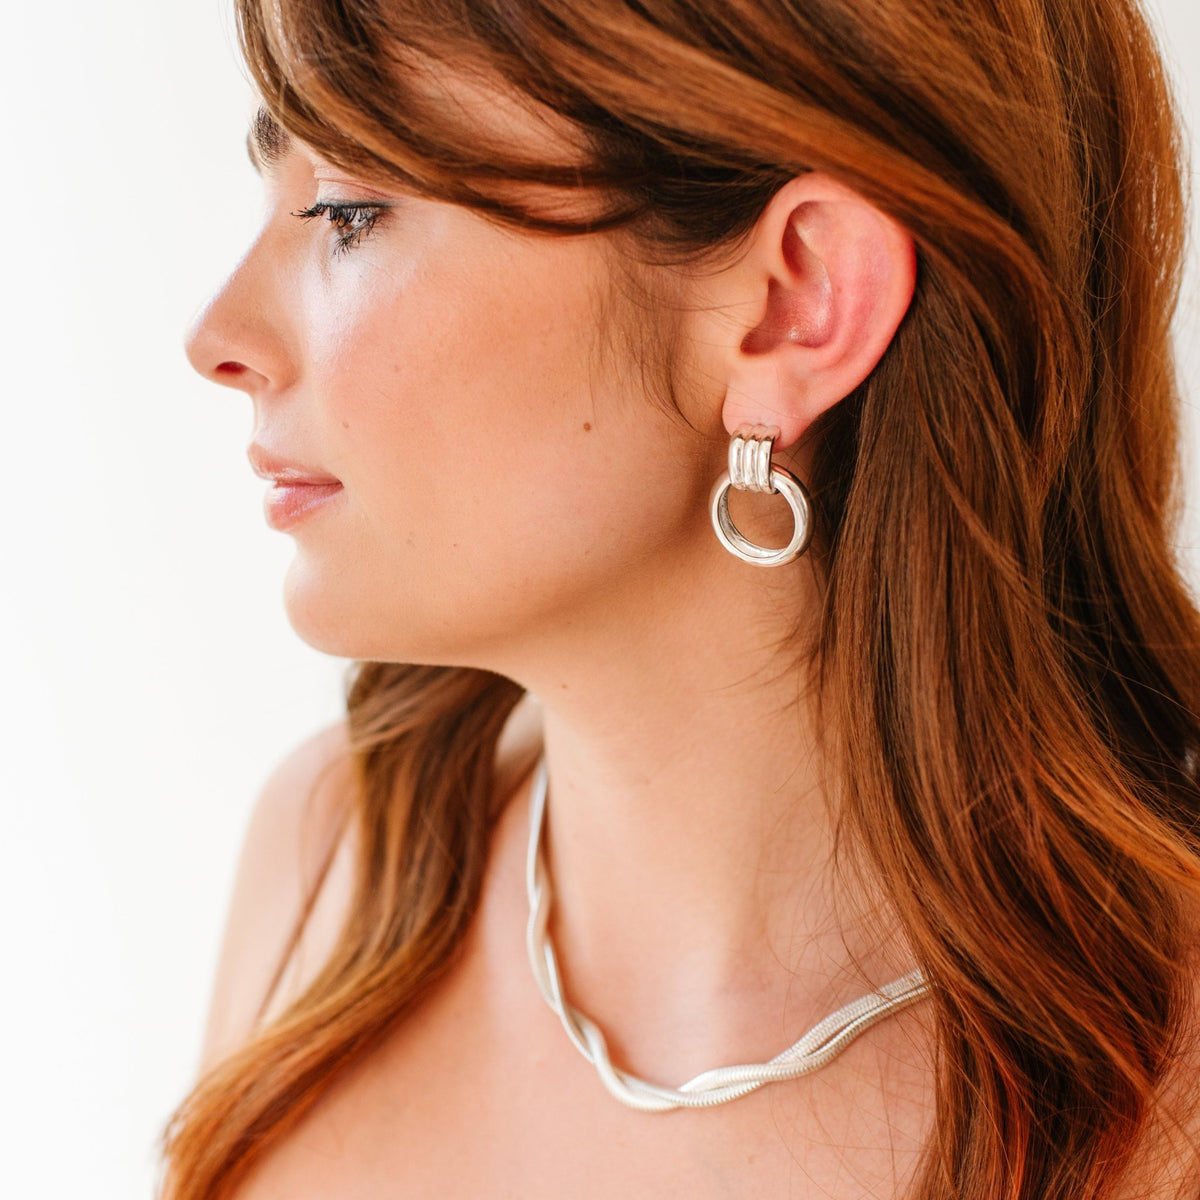 FEARLESS ARC STATEMENT HOOPS - SILVER - SO PRETTY CARA COTTER